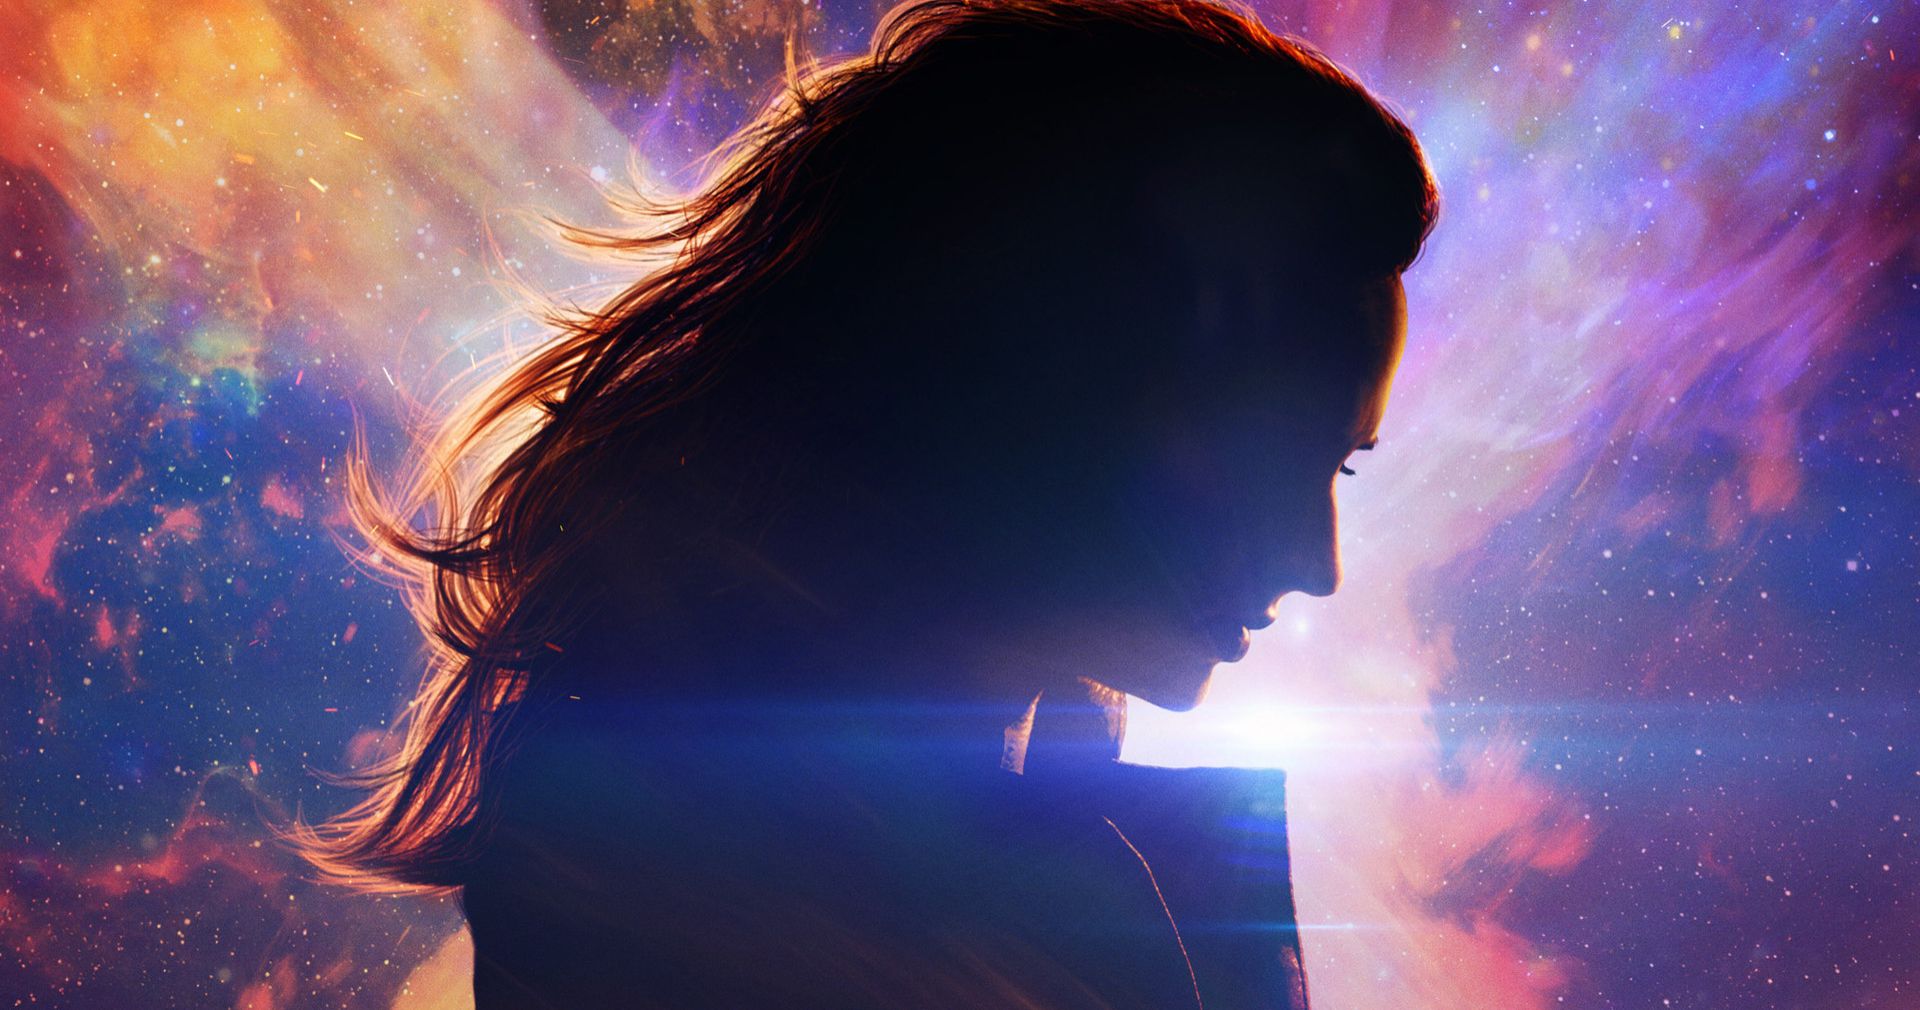 Dark Phoenix Director Takes Full Blame for Delivering Such a Big Bomb